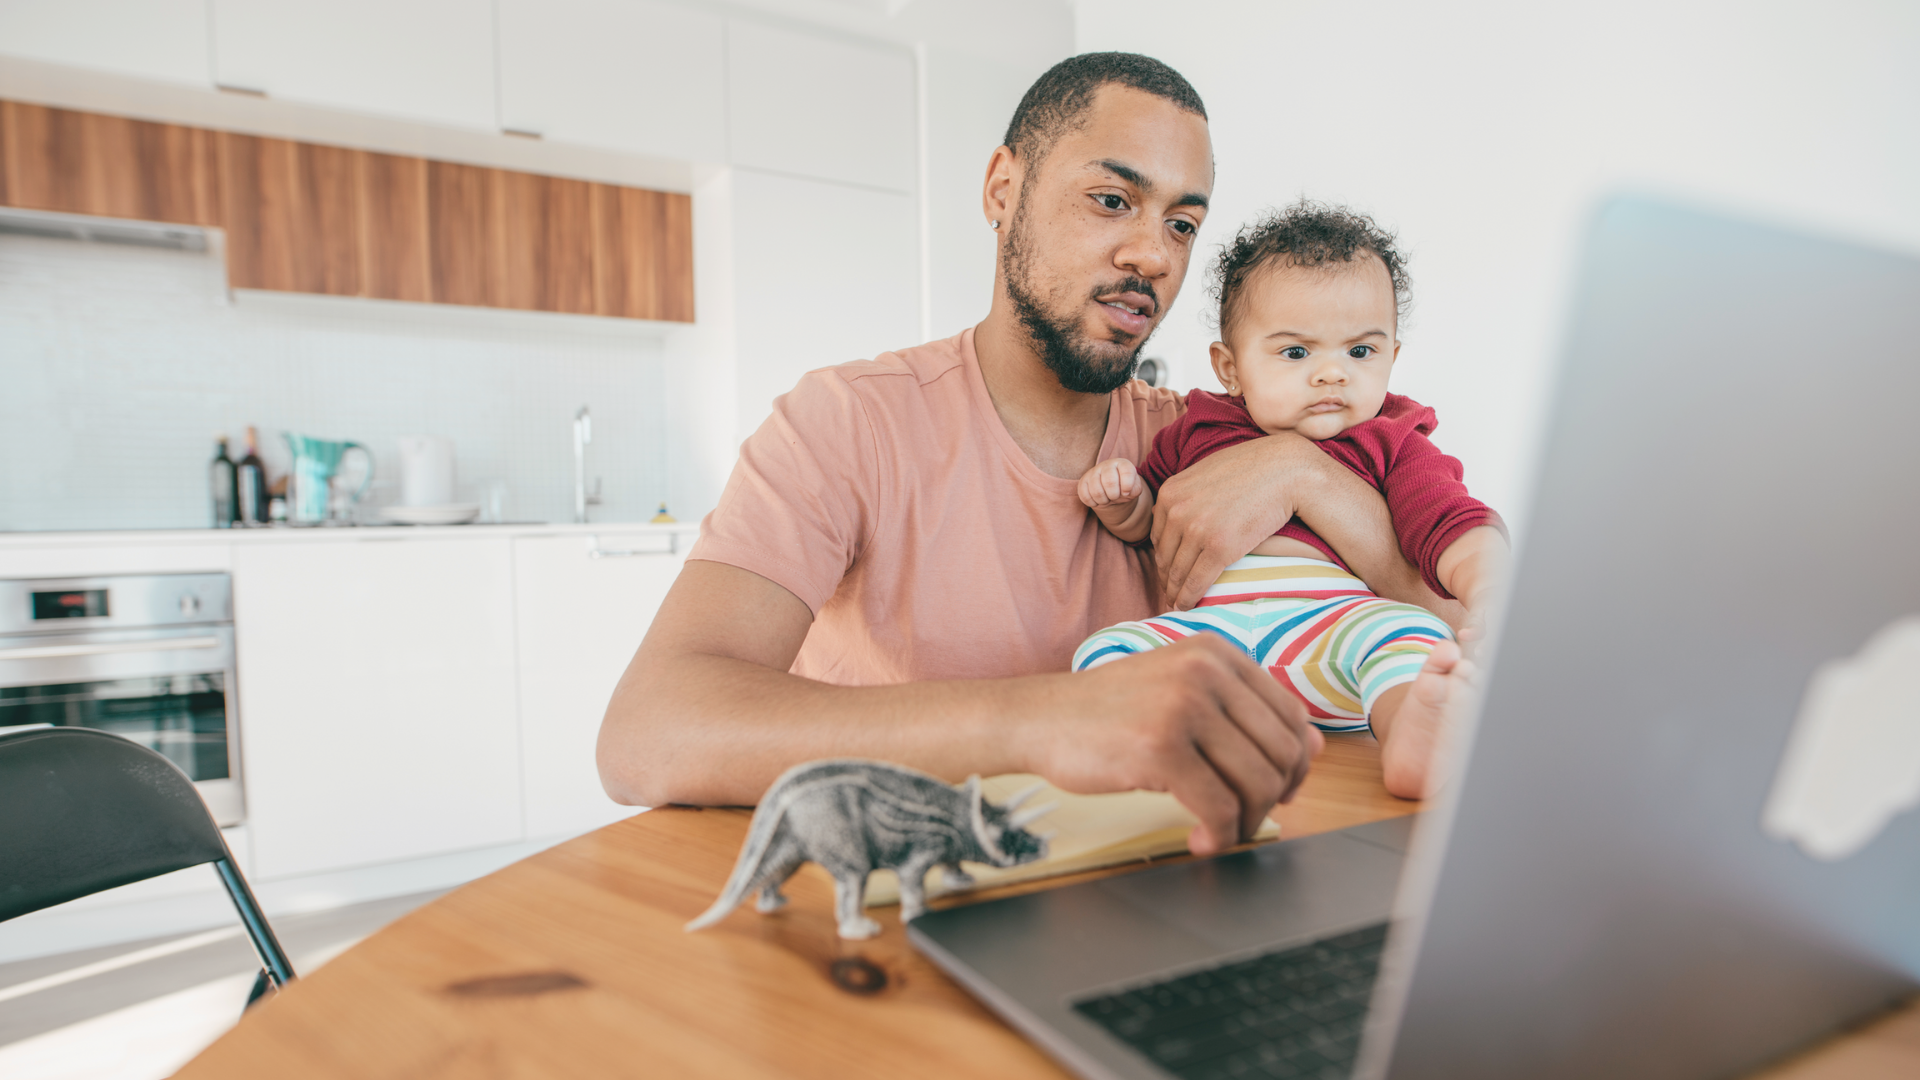 Image of a man holding a baby sitting at a table with a lap top open indicating that he is using the Bill Pay eService from Prospera Credit Union. The image represents the convenience and ease of managing bills online and how the service can simplify your life.